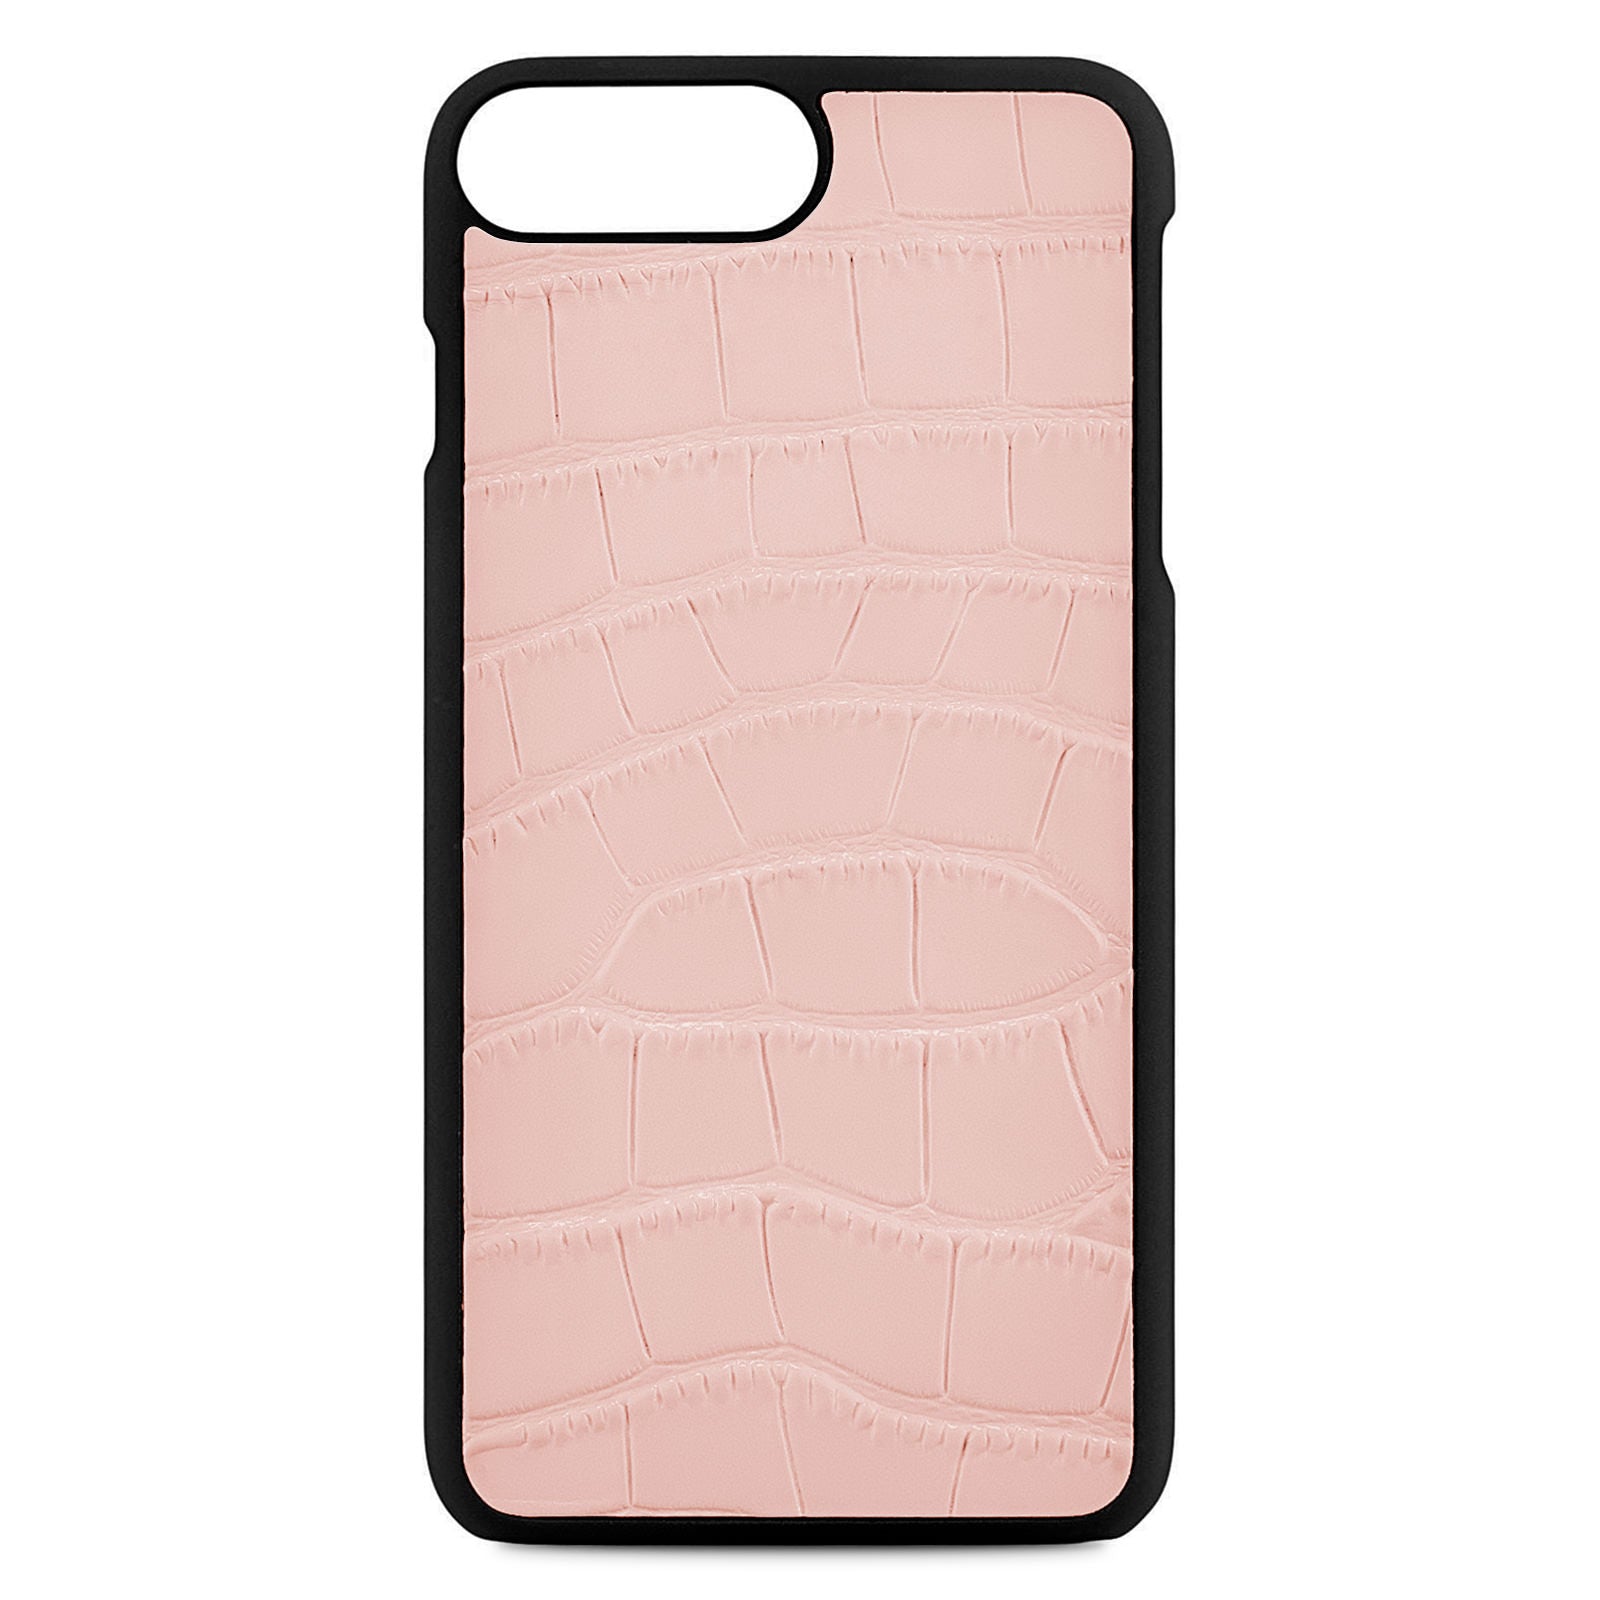 Blank Personalised Pink Croc Leather iPhone 8 Plus Case